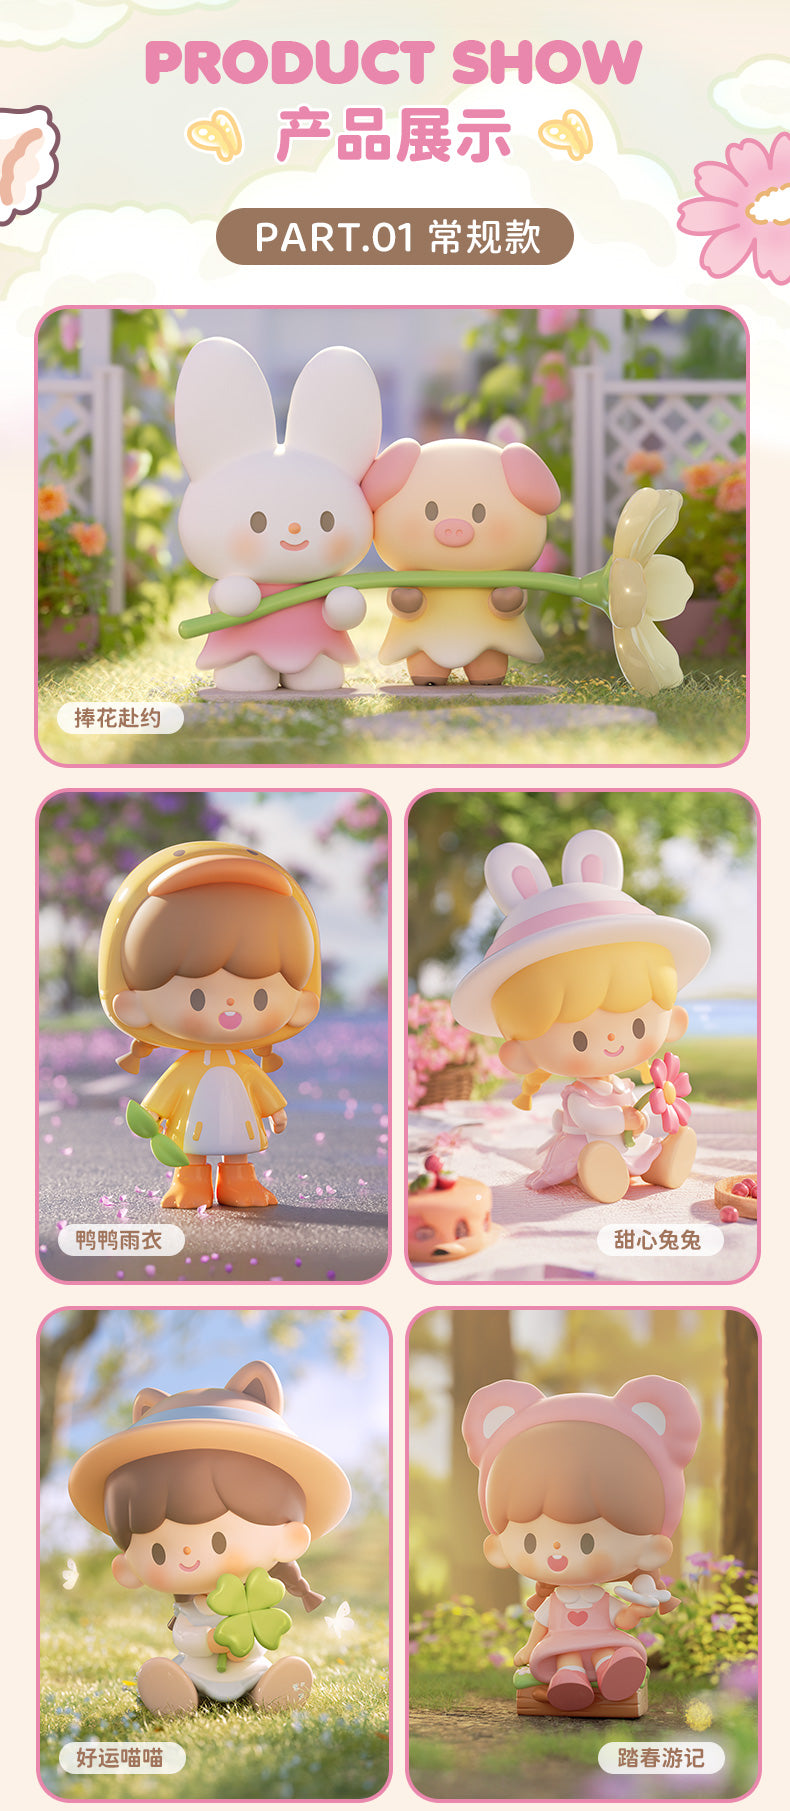 Cartoon characters in zZoton Garden Spring Tour Blind Box Series.